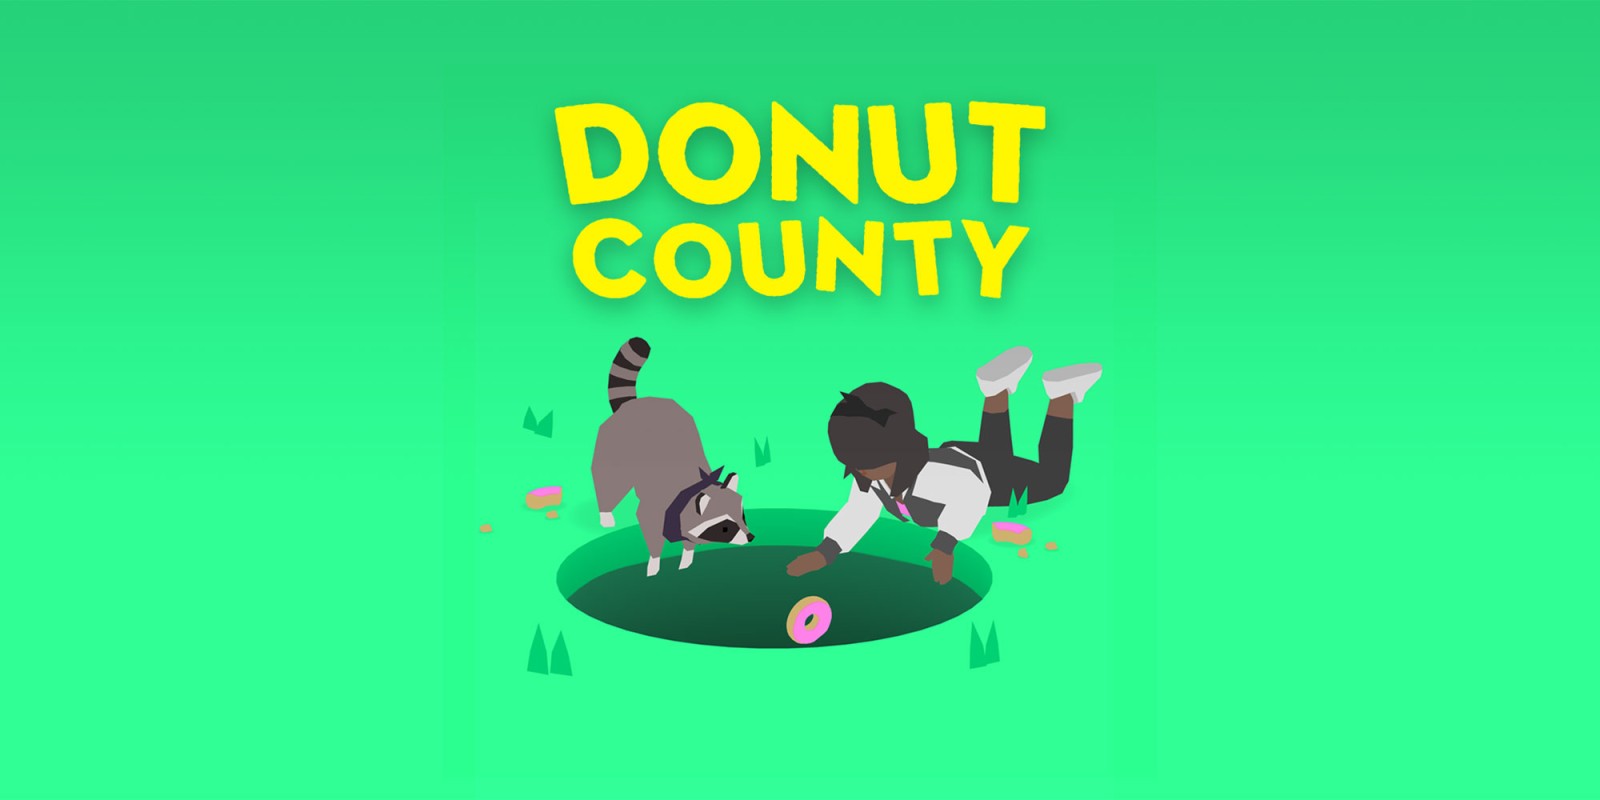 bk donut county download